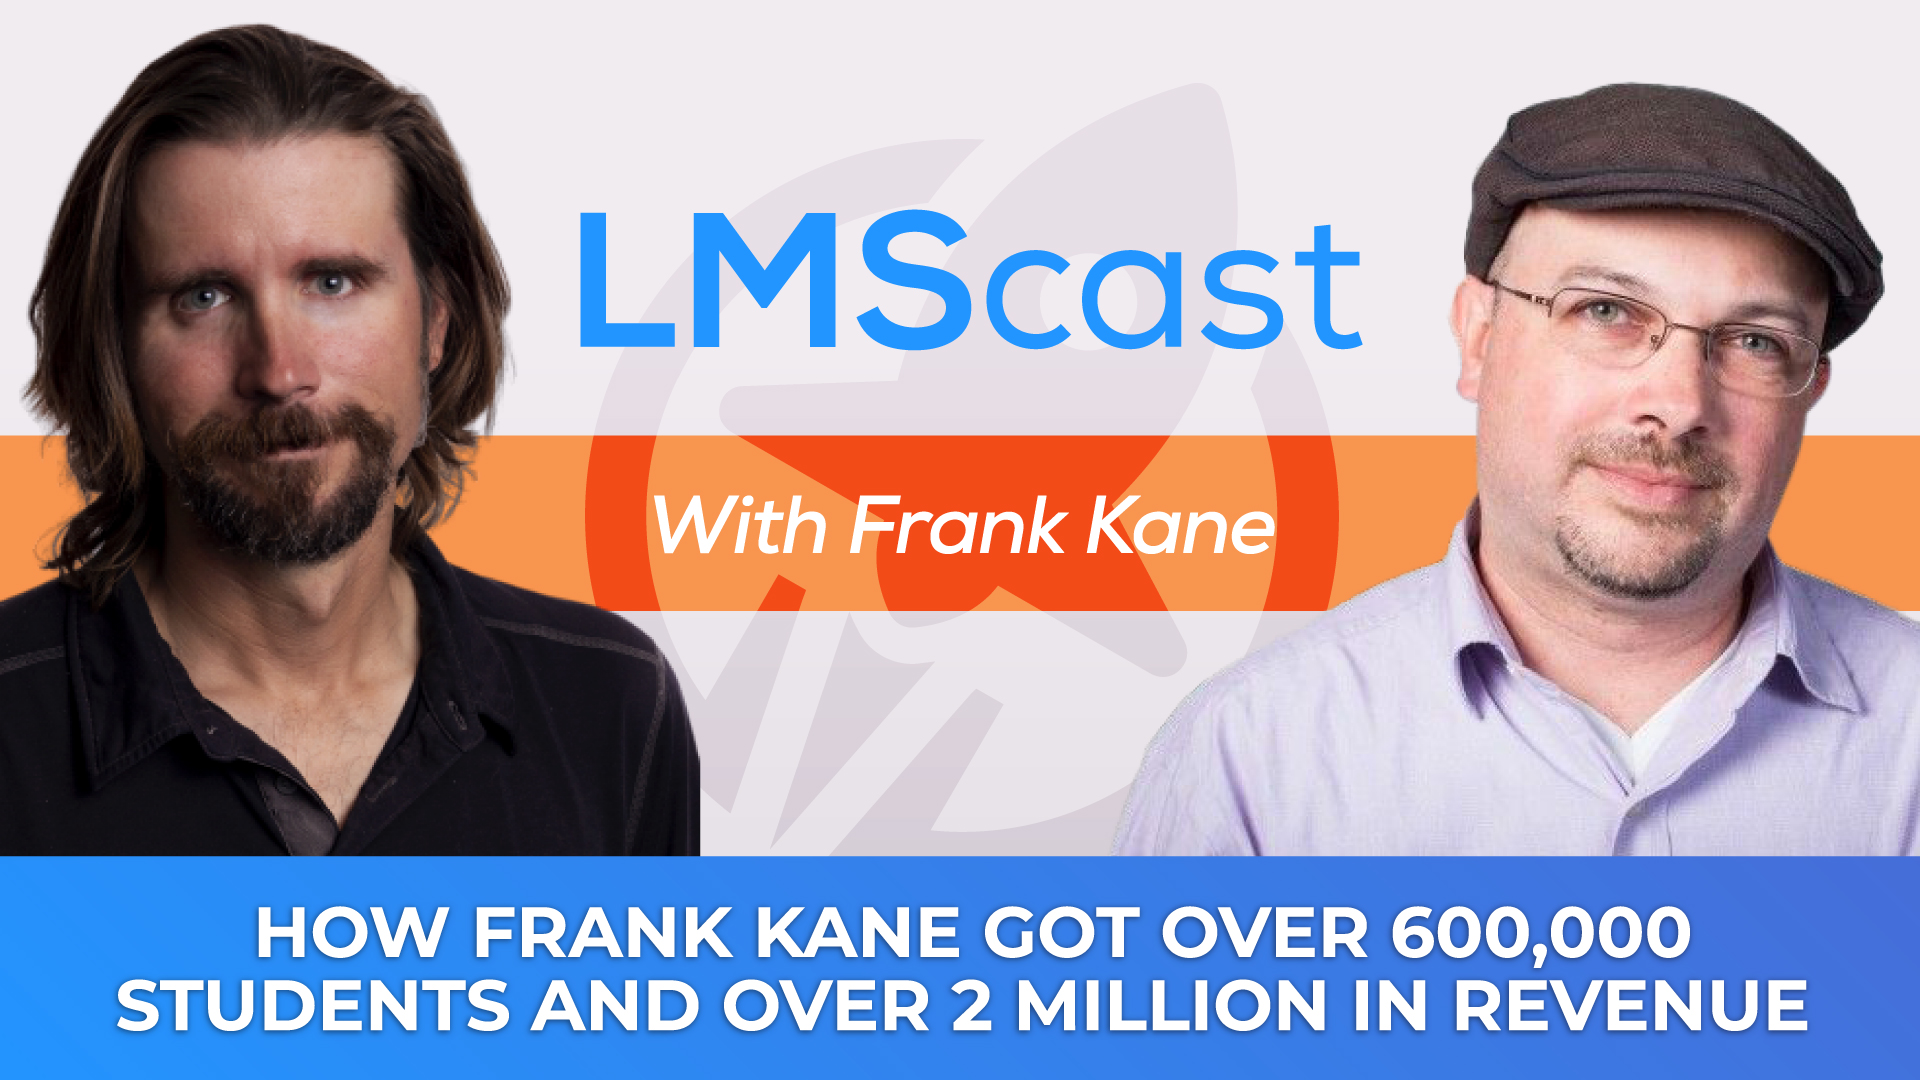 Udemy Course Creator Frank Kane Shares How He Got Over 600,000 Students and 2 Million Dollars